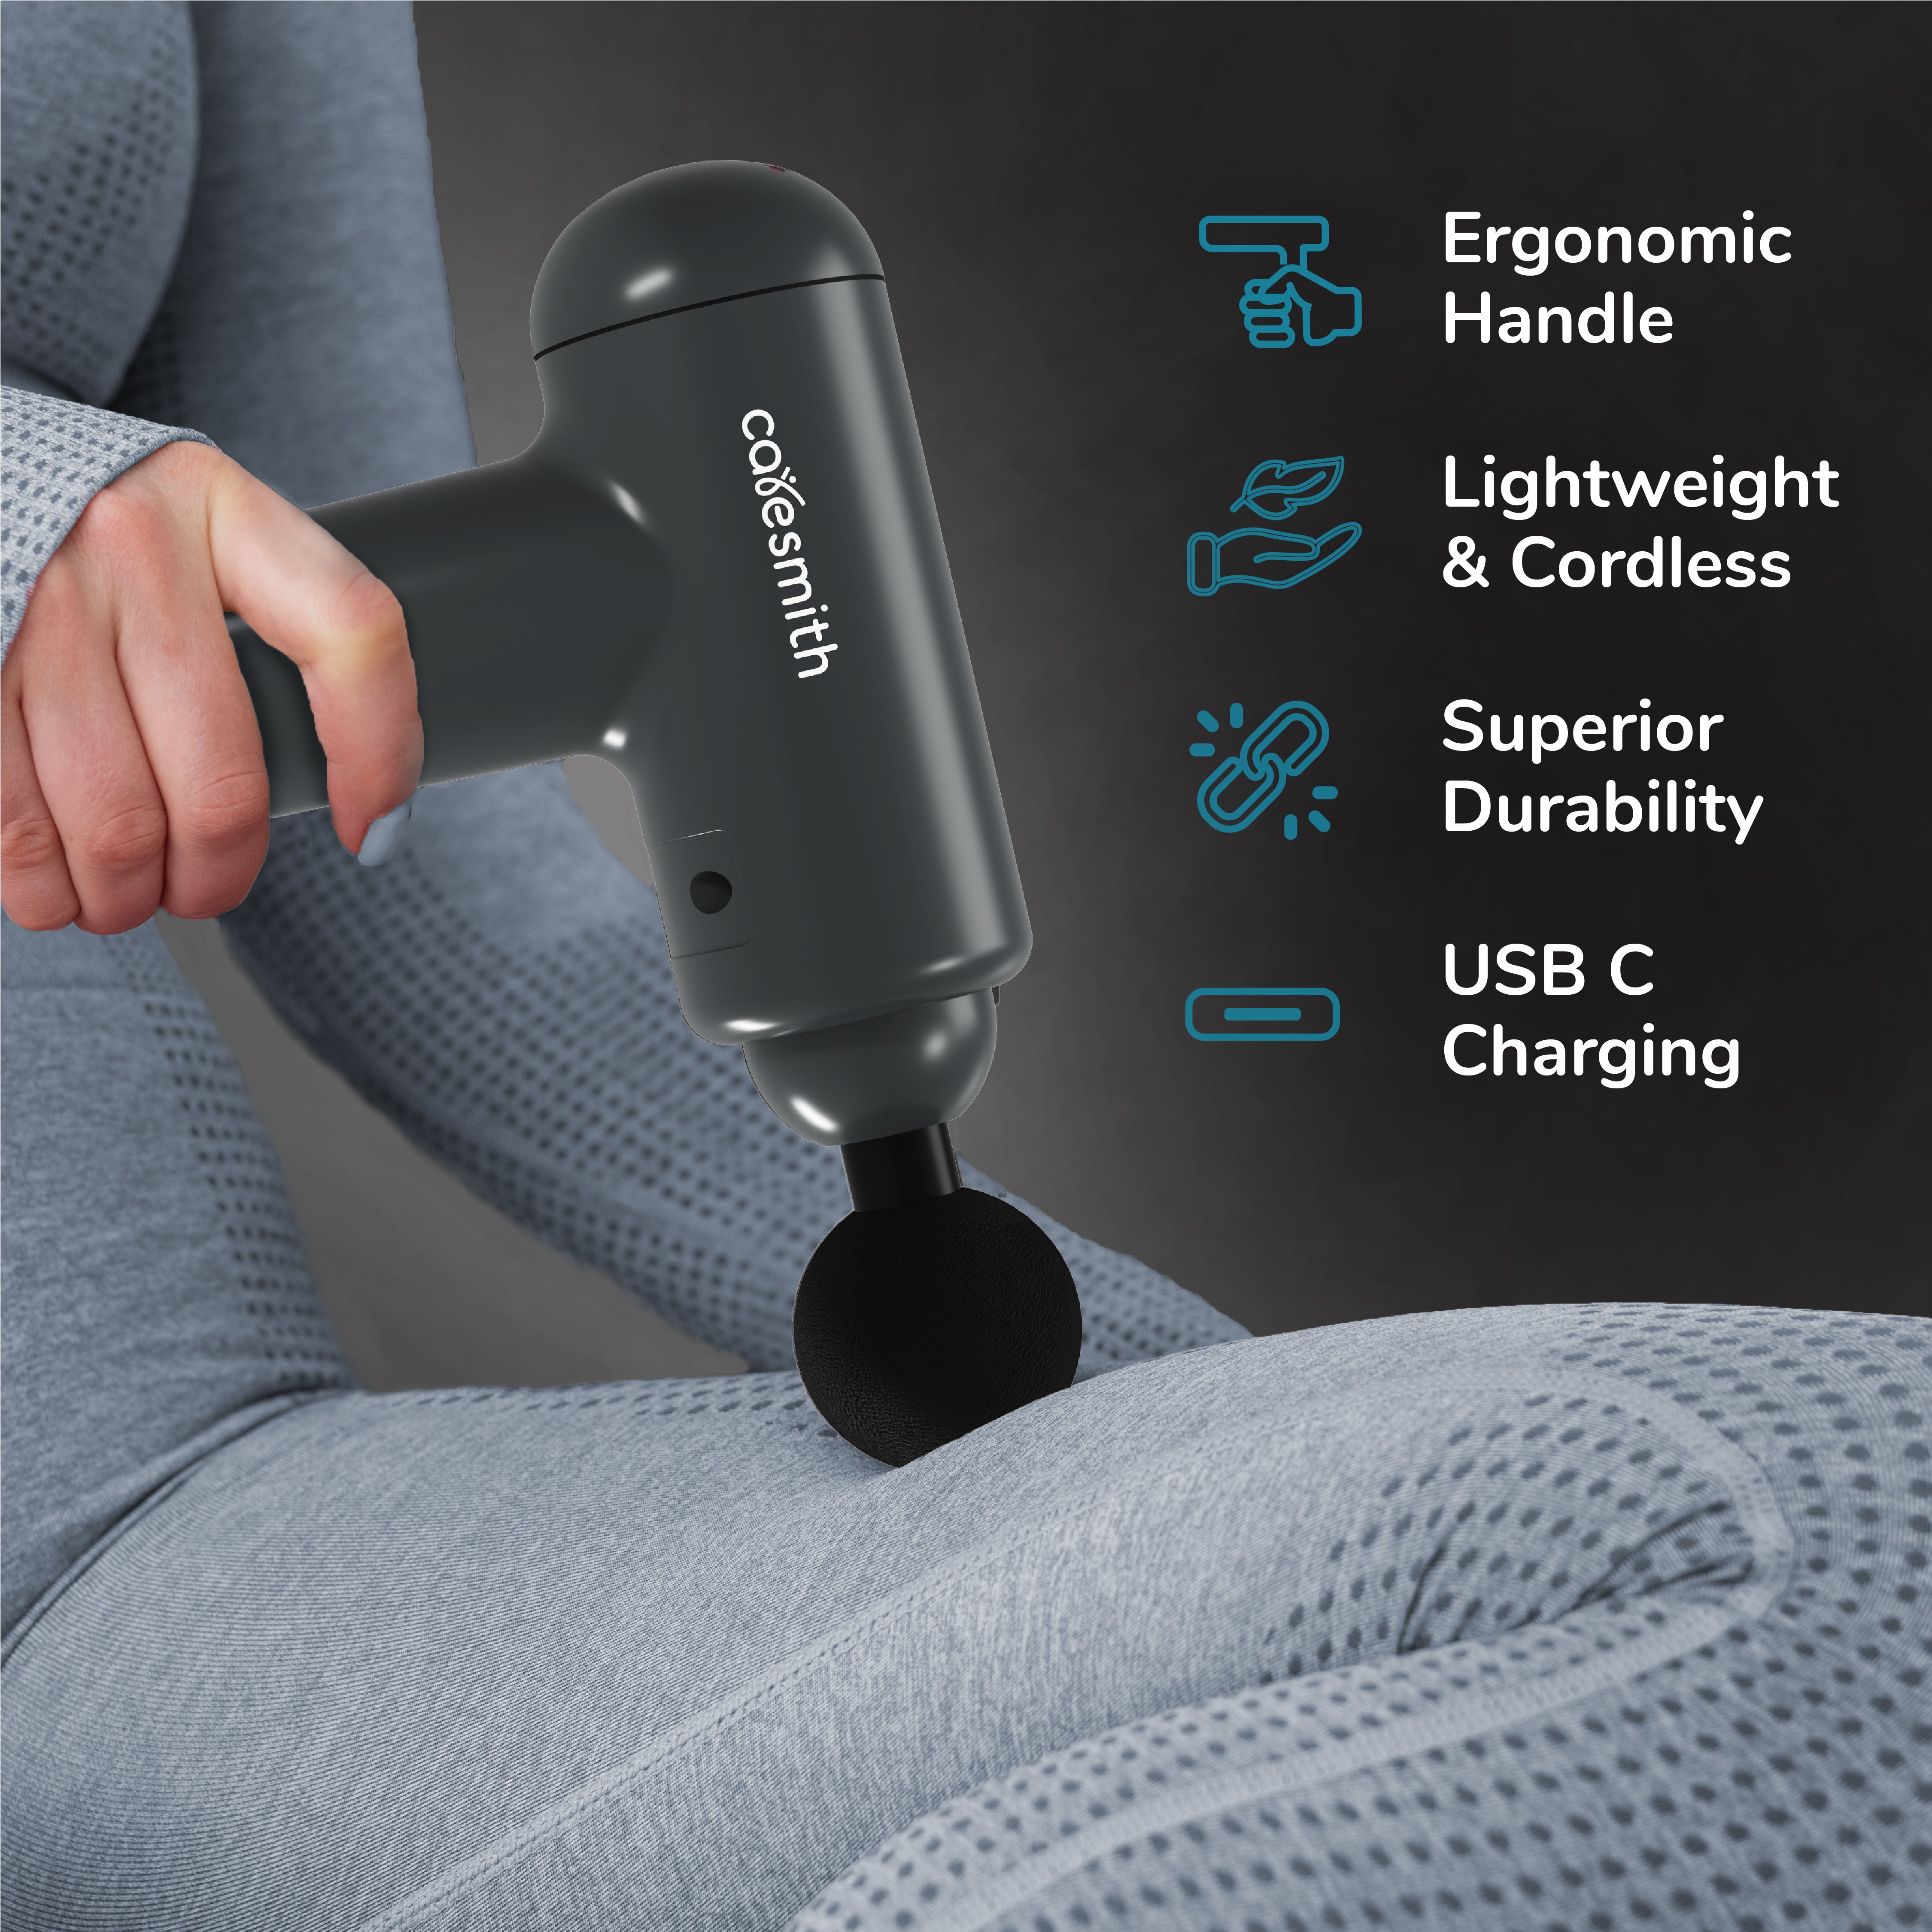 Say Goodbye to Lower Back Pain with the Power of Massage Guns